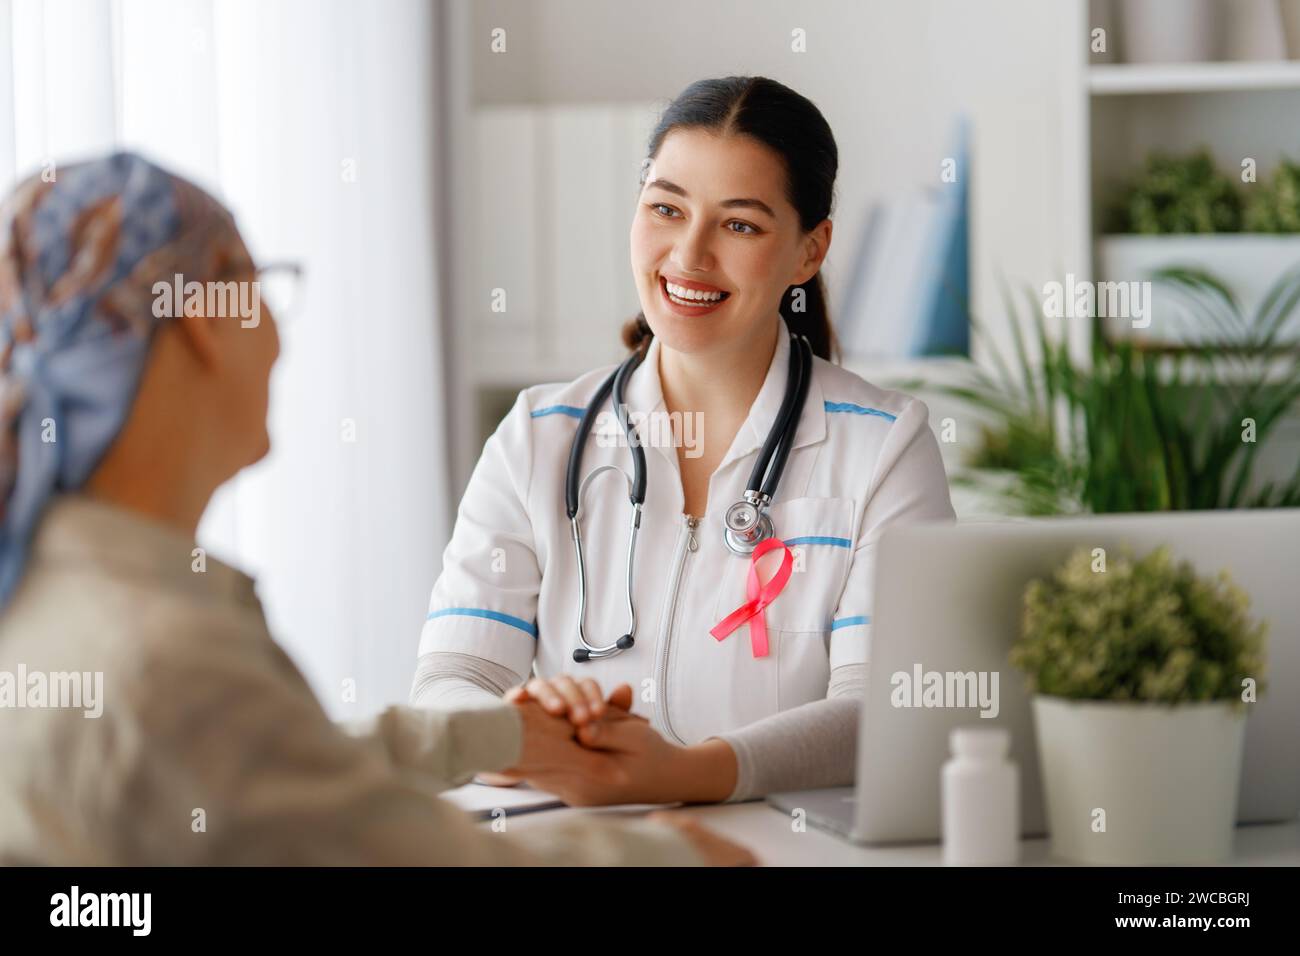 Colour ribbon for concept of illness awareness. Female patient listening to doctor in medical office. Raising knowledge on people living with disease. Stock Photo